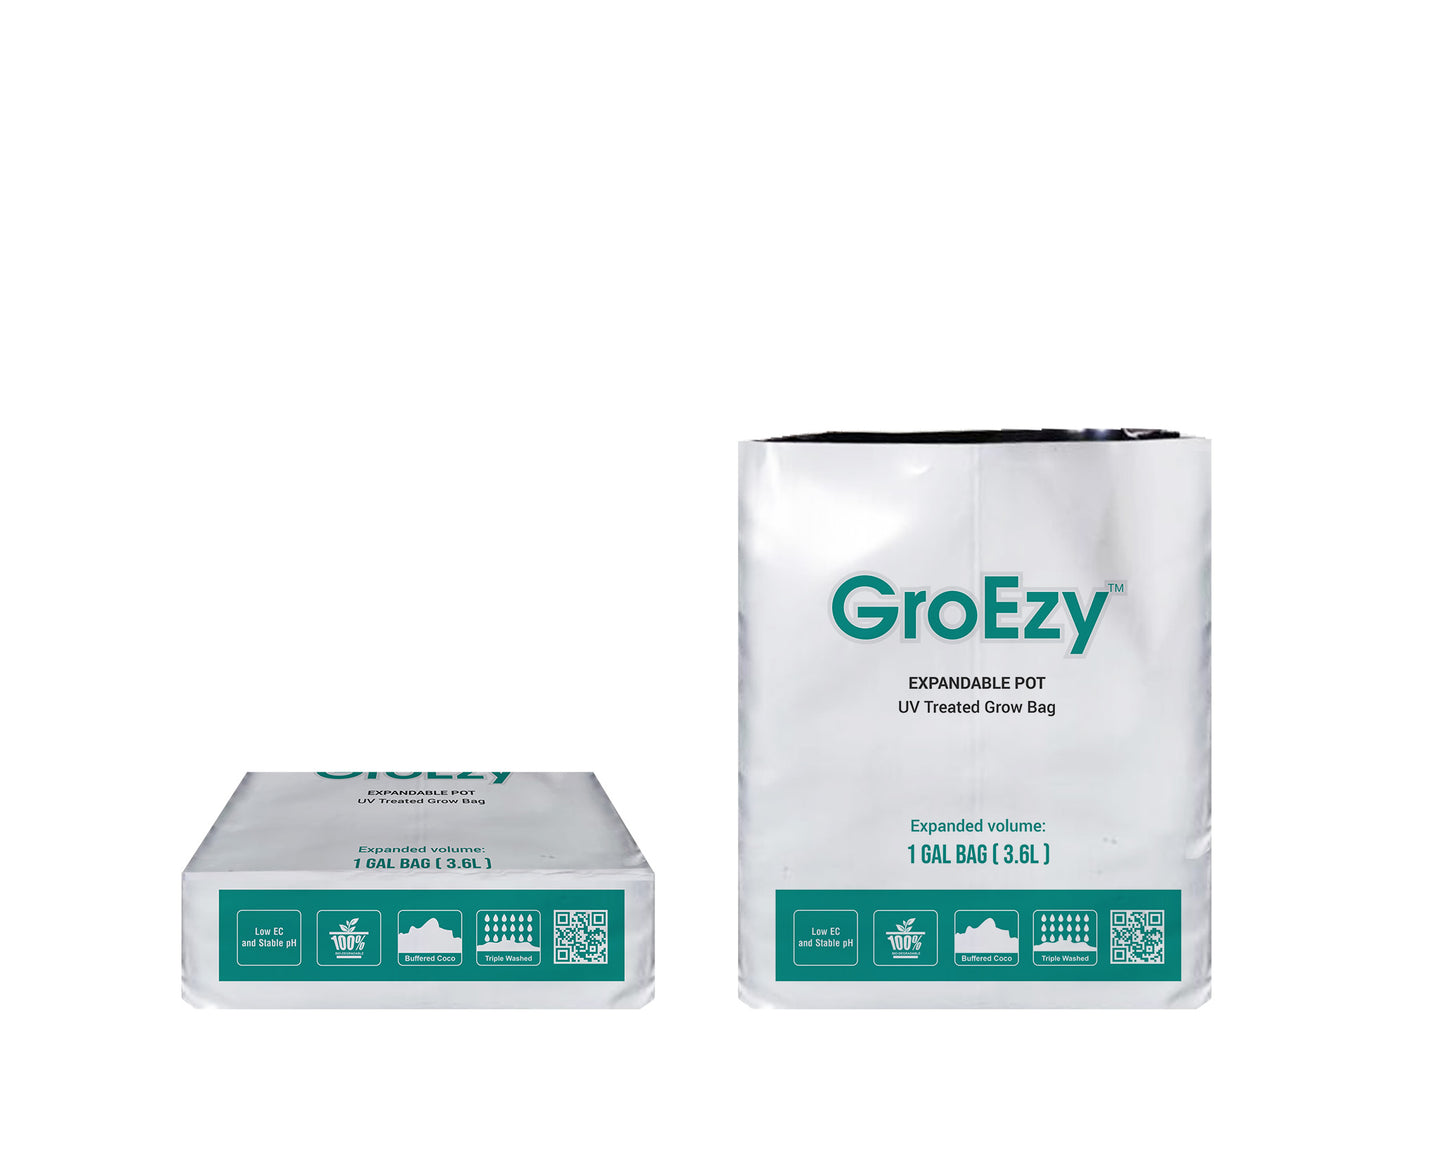 GroEzy™ 1 Gallon Expandable Pot in UV treated grow bag